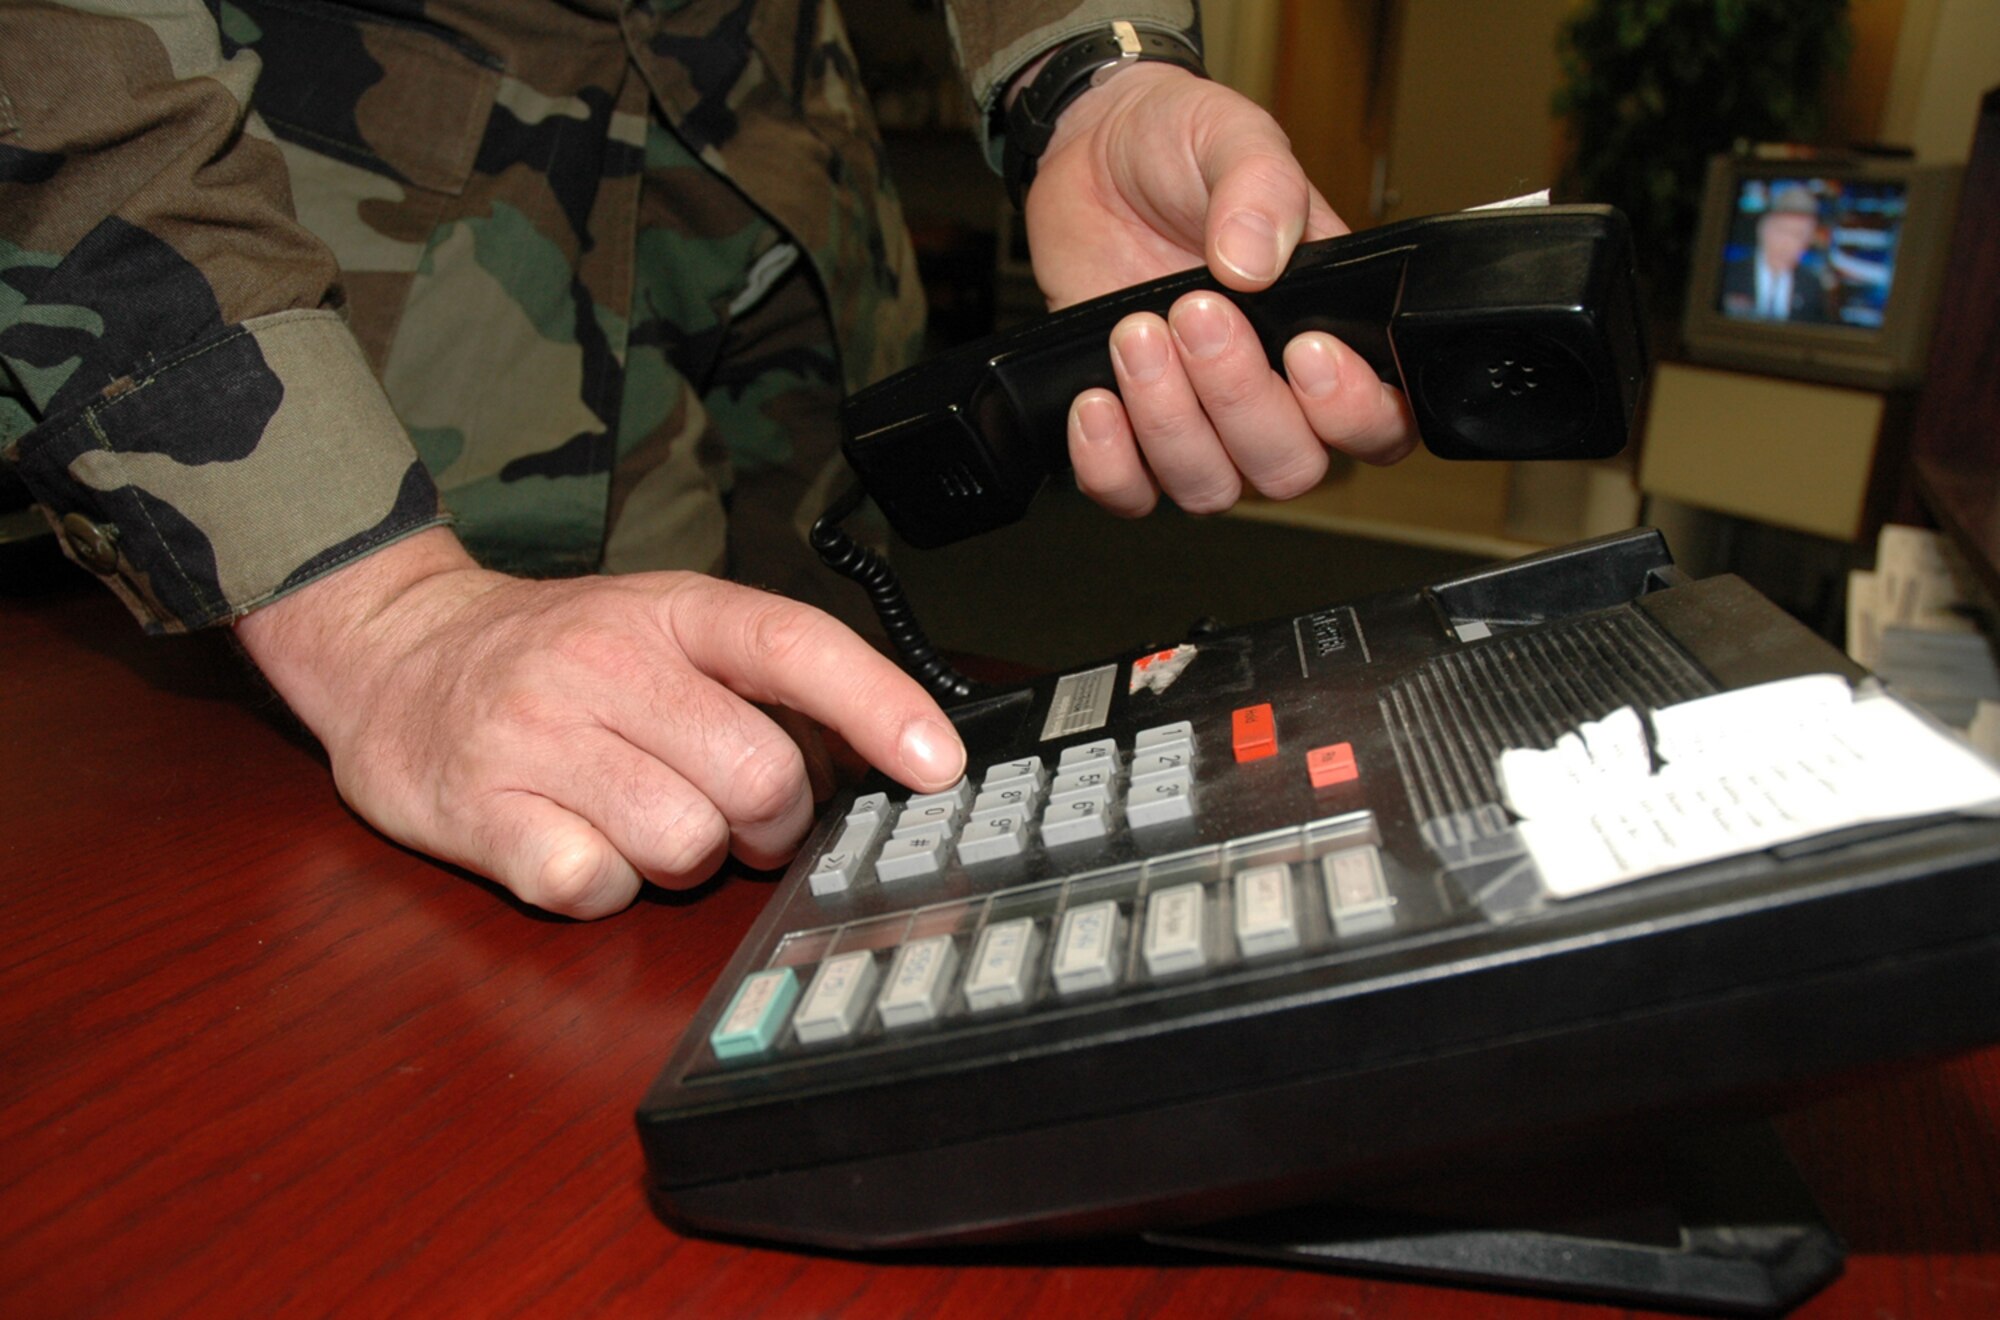 OSAN AIR BASE, Republic of Korea --  Starting today, people will need personal identification numbers to make calls that don't begin with 0505, 010, 011 and 031. (Photo illustration by Staff Sgt. Benjamin Rojek)